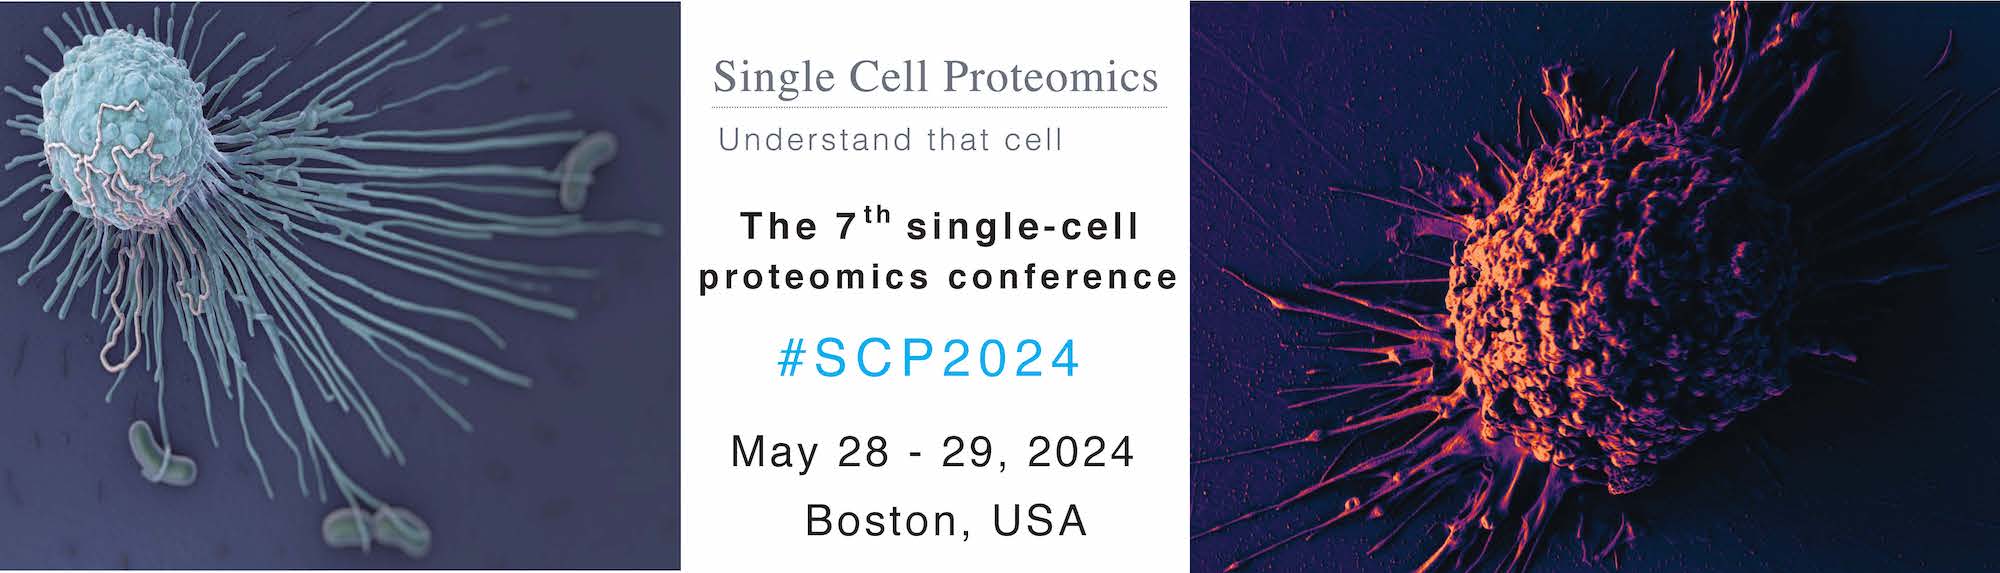 Seventh single-cell proteomics conference (SCP2024)